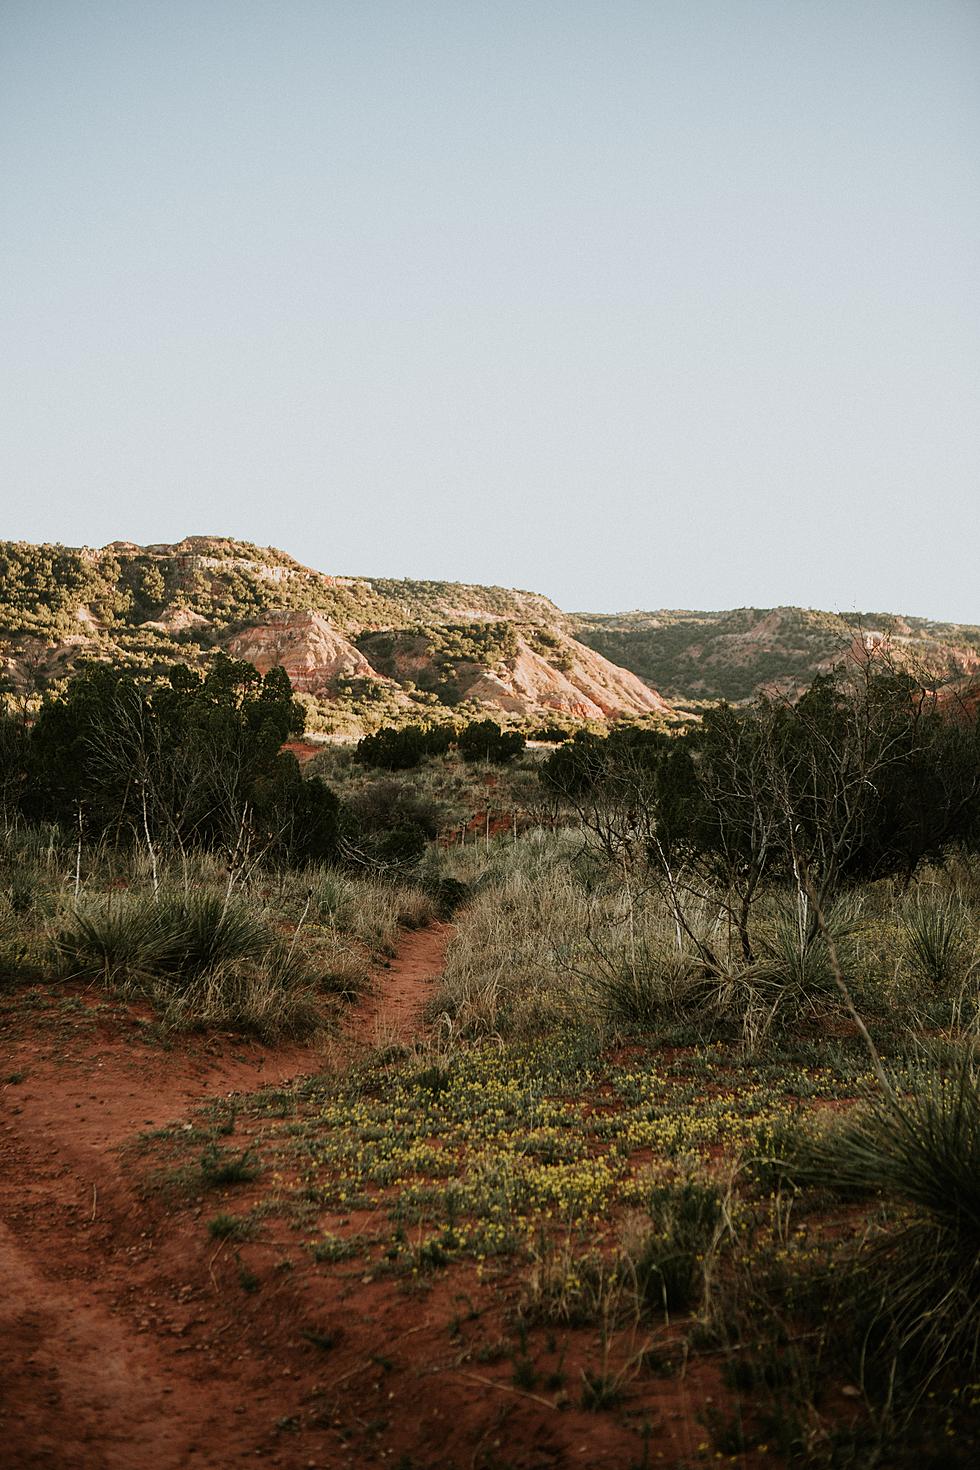 Locals Suspect Bigfoot Is Living Somewhere In Palo Duro Canyon in the Texas Panhandle